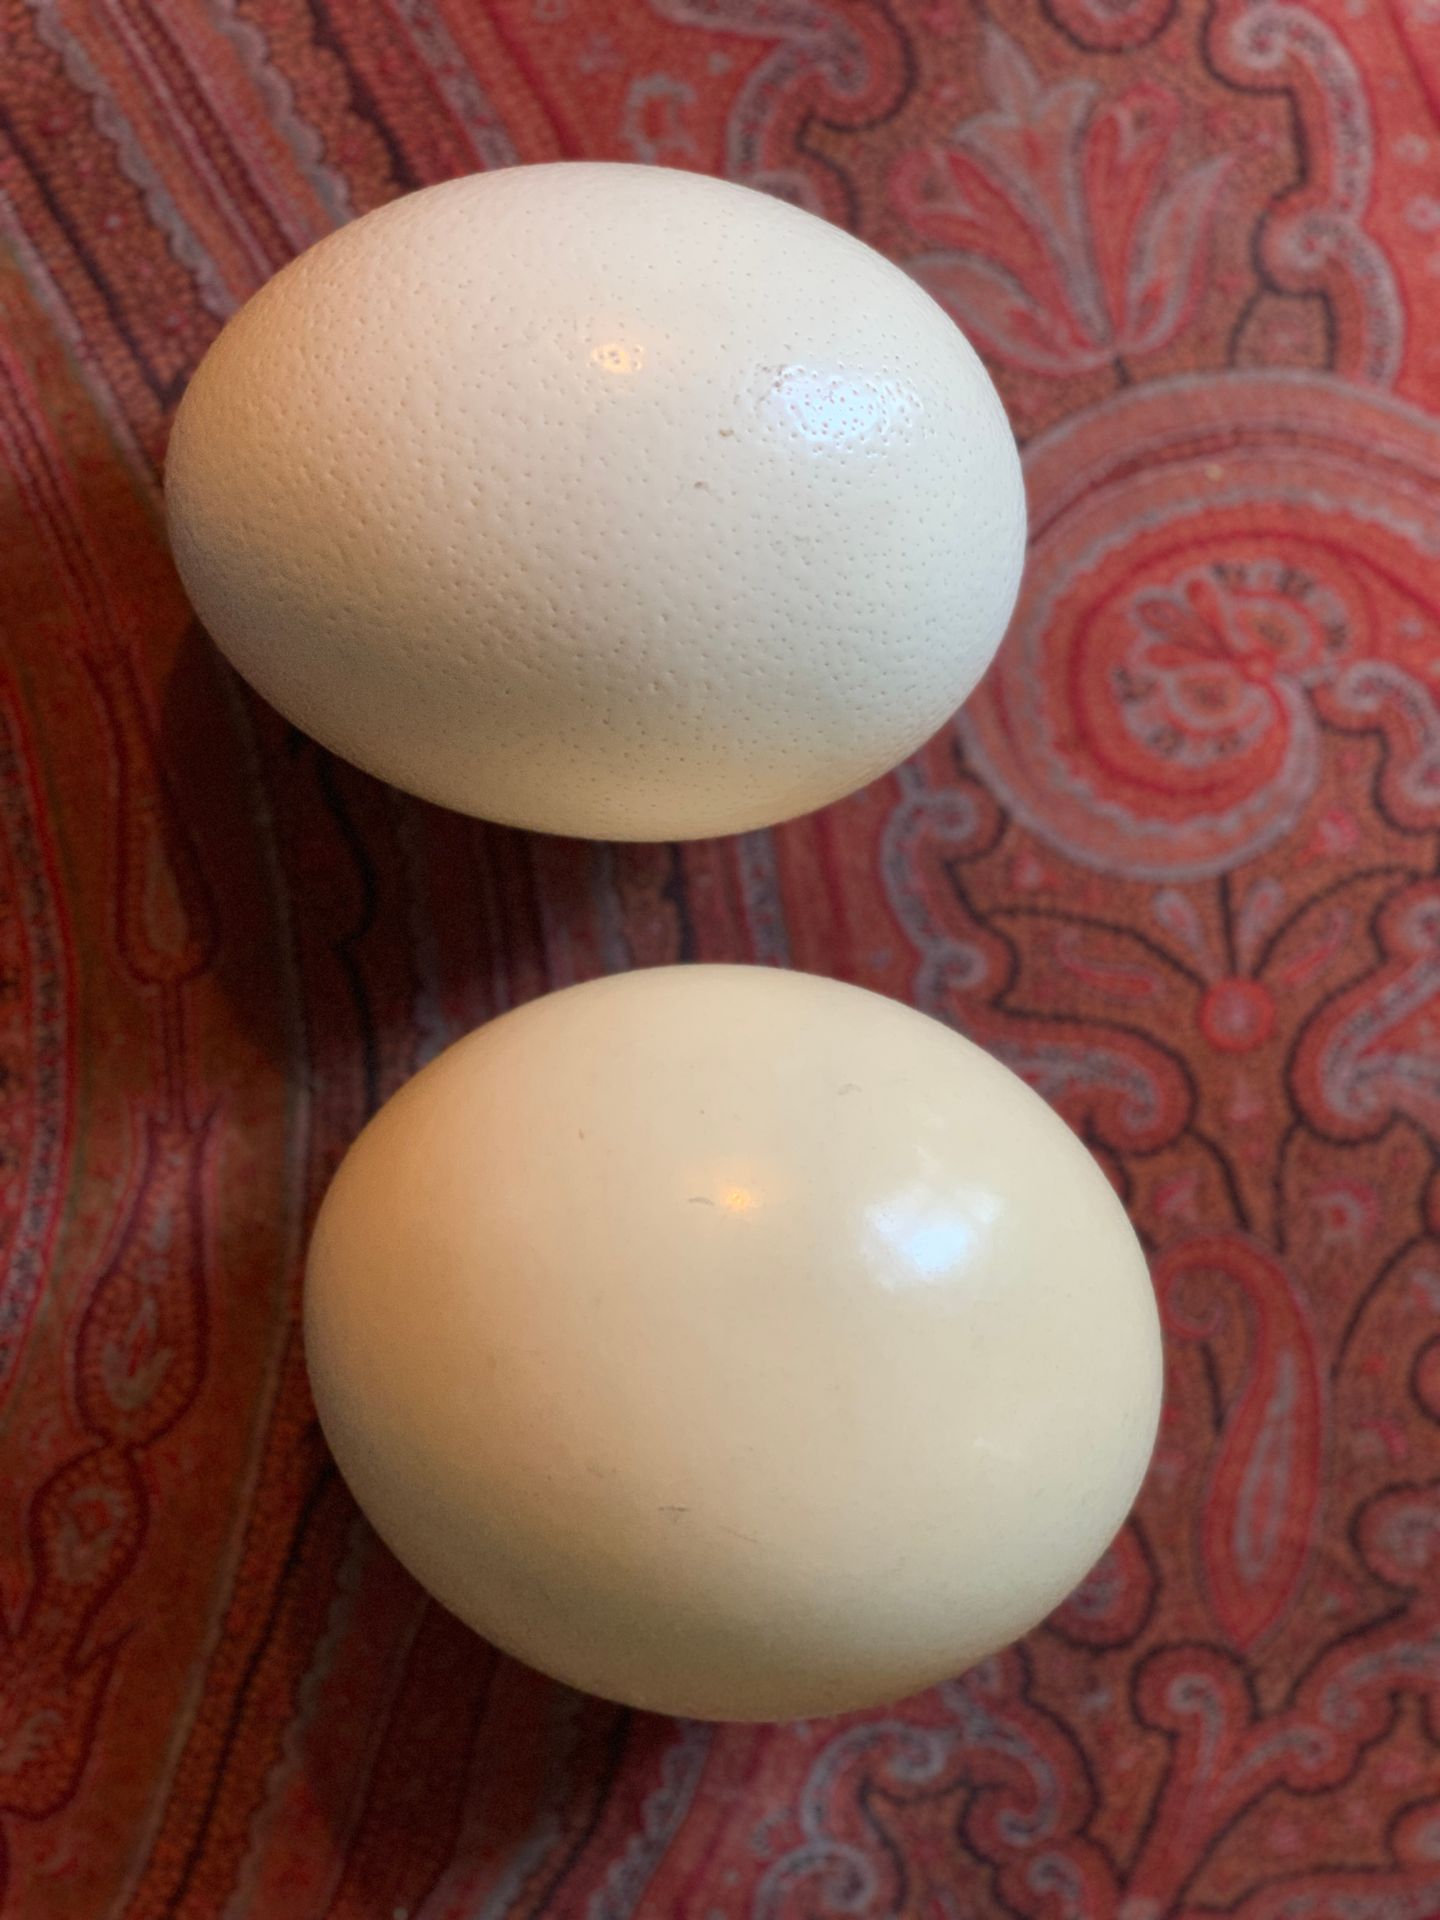 Null Ostrich (Struthio camelus) (D): two eggs from breeding

Species not regulat&hellip;